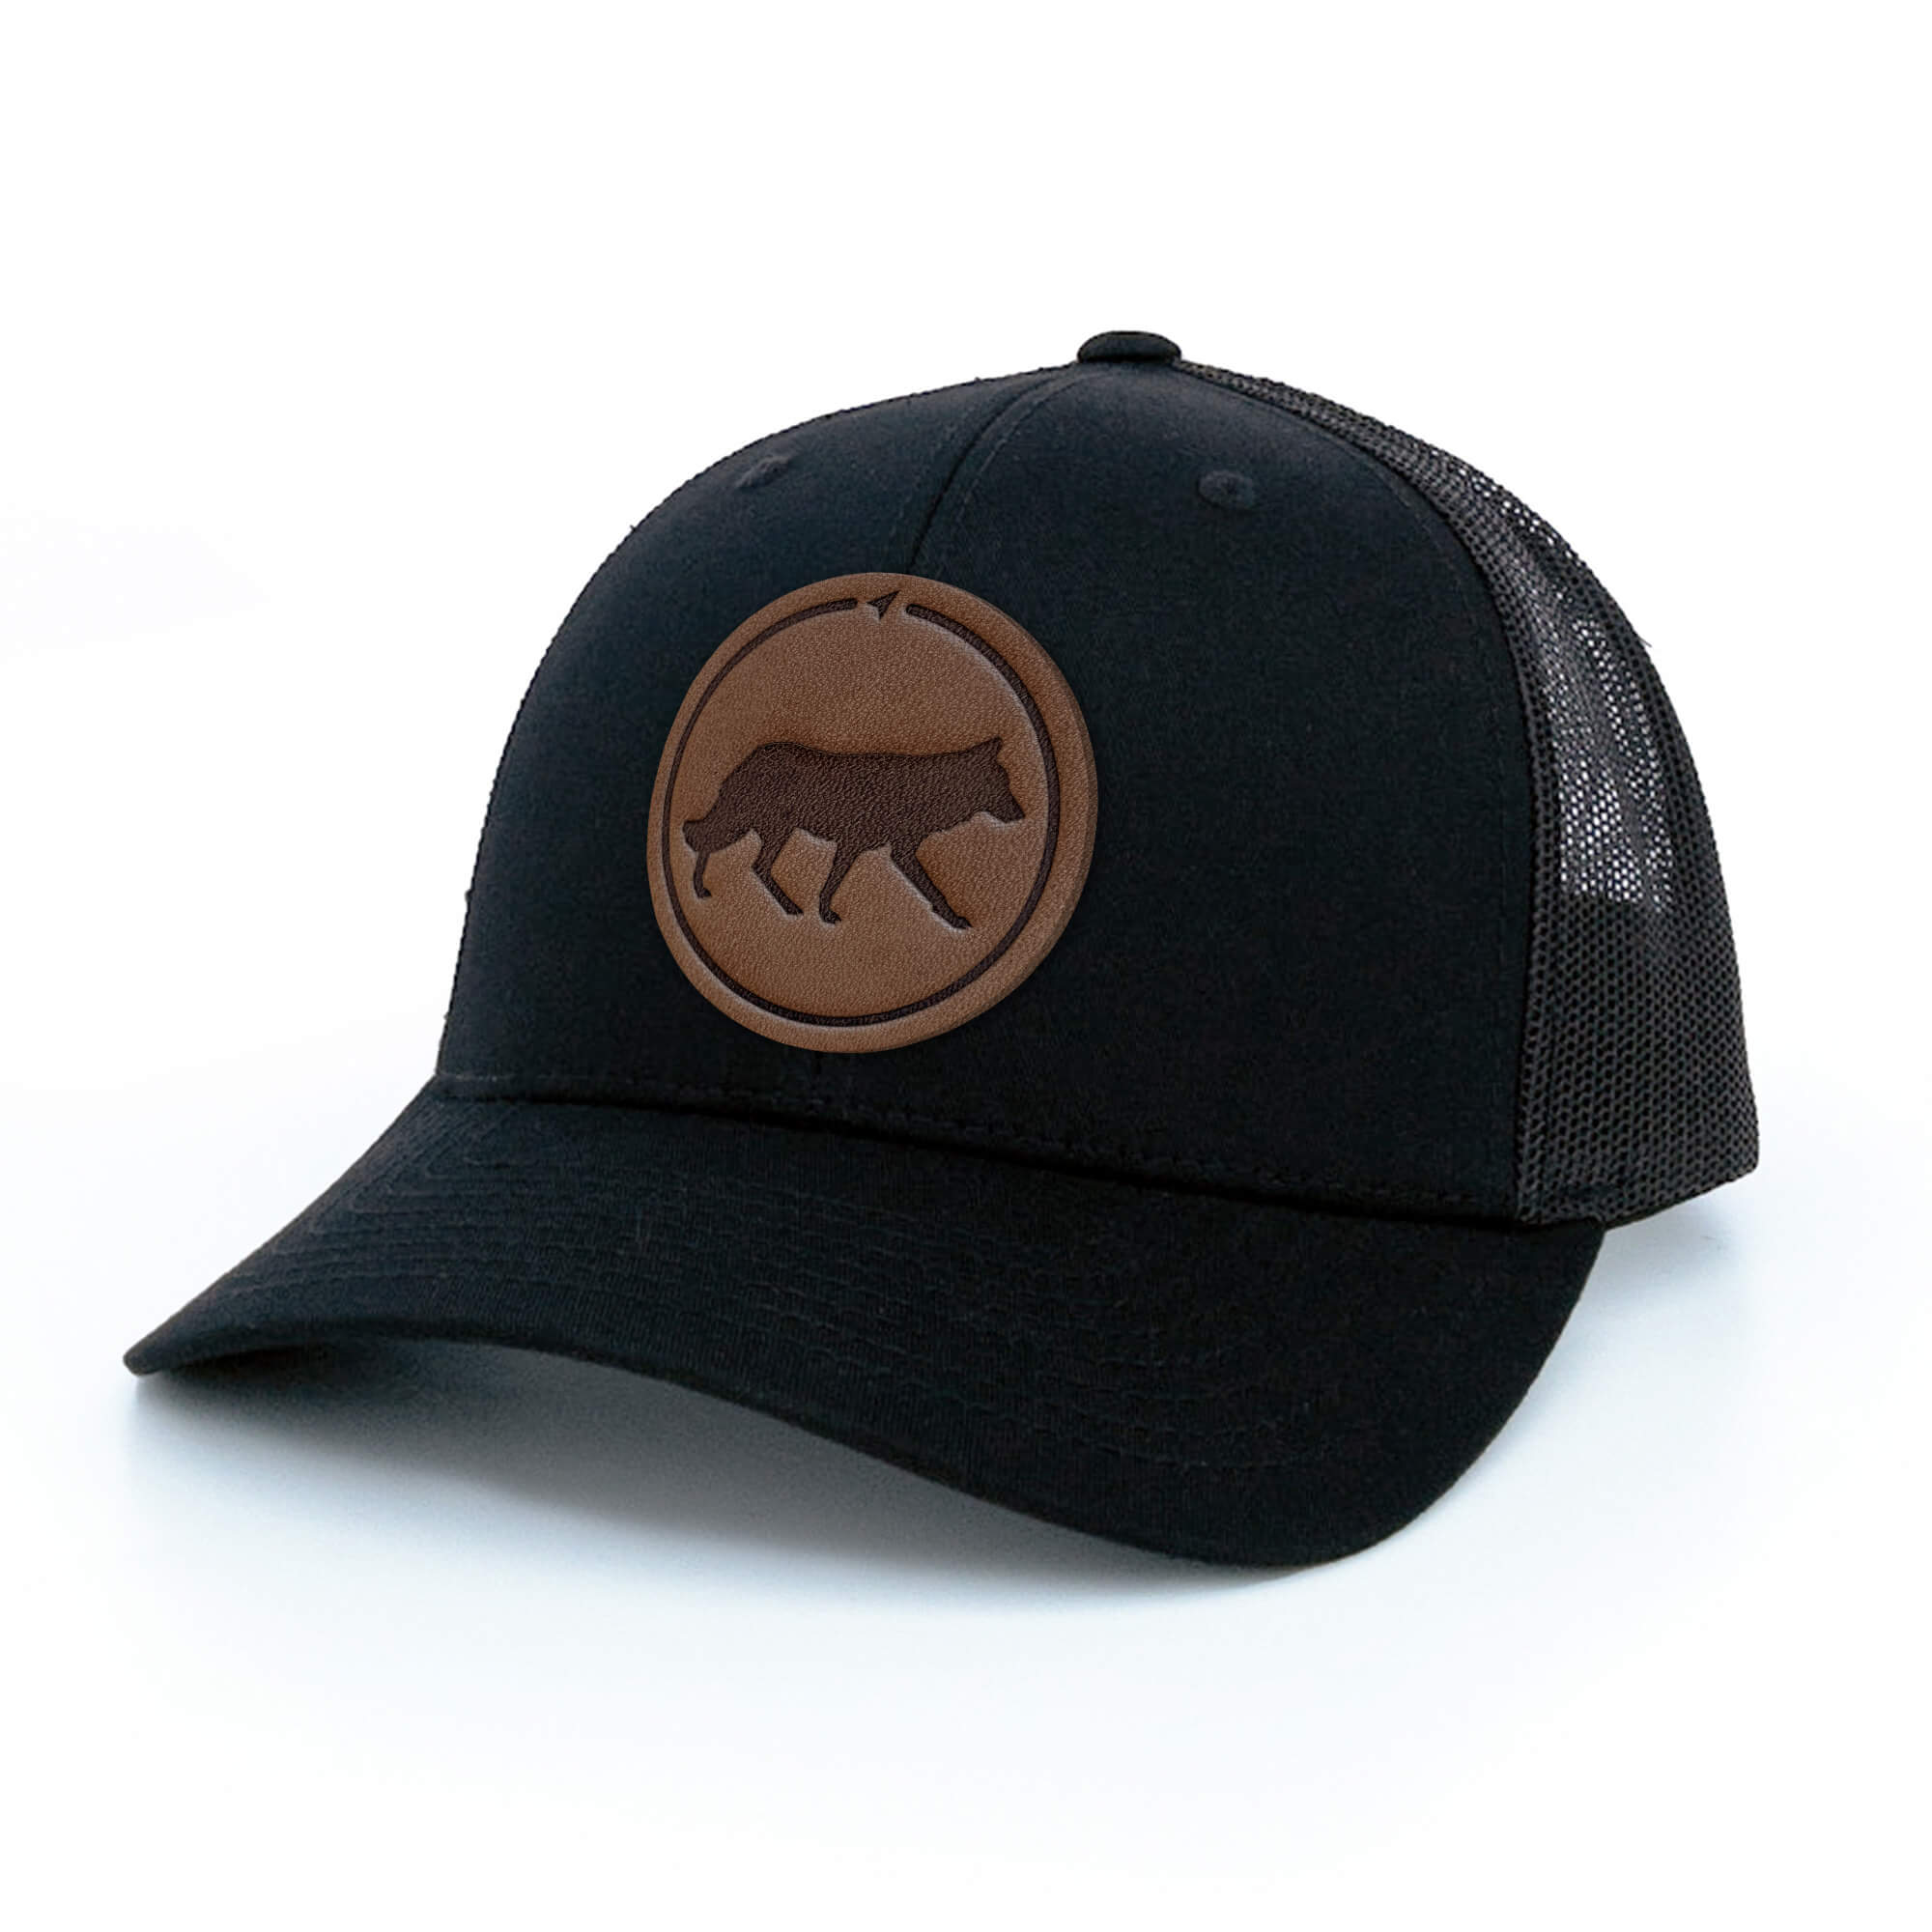 Black trucker hat with full-grain leather patch of Wolf | BLACK-004-007, CHARC-004-007, NAVY-004-007, HGREY-004-007, MOSS-004-007, BROWN-004-007